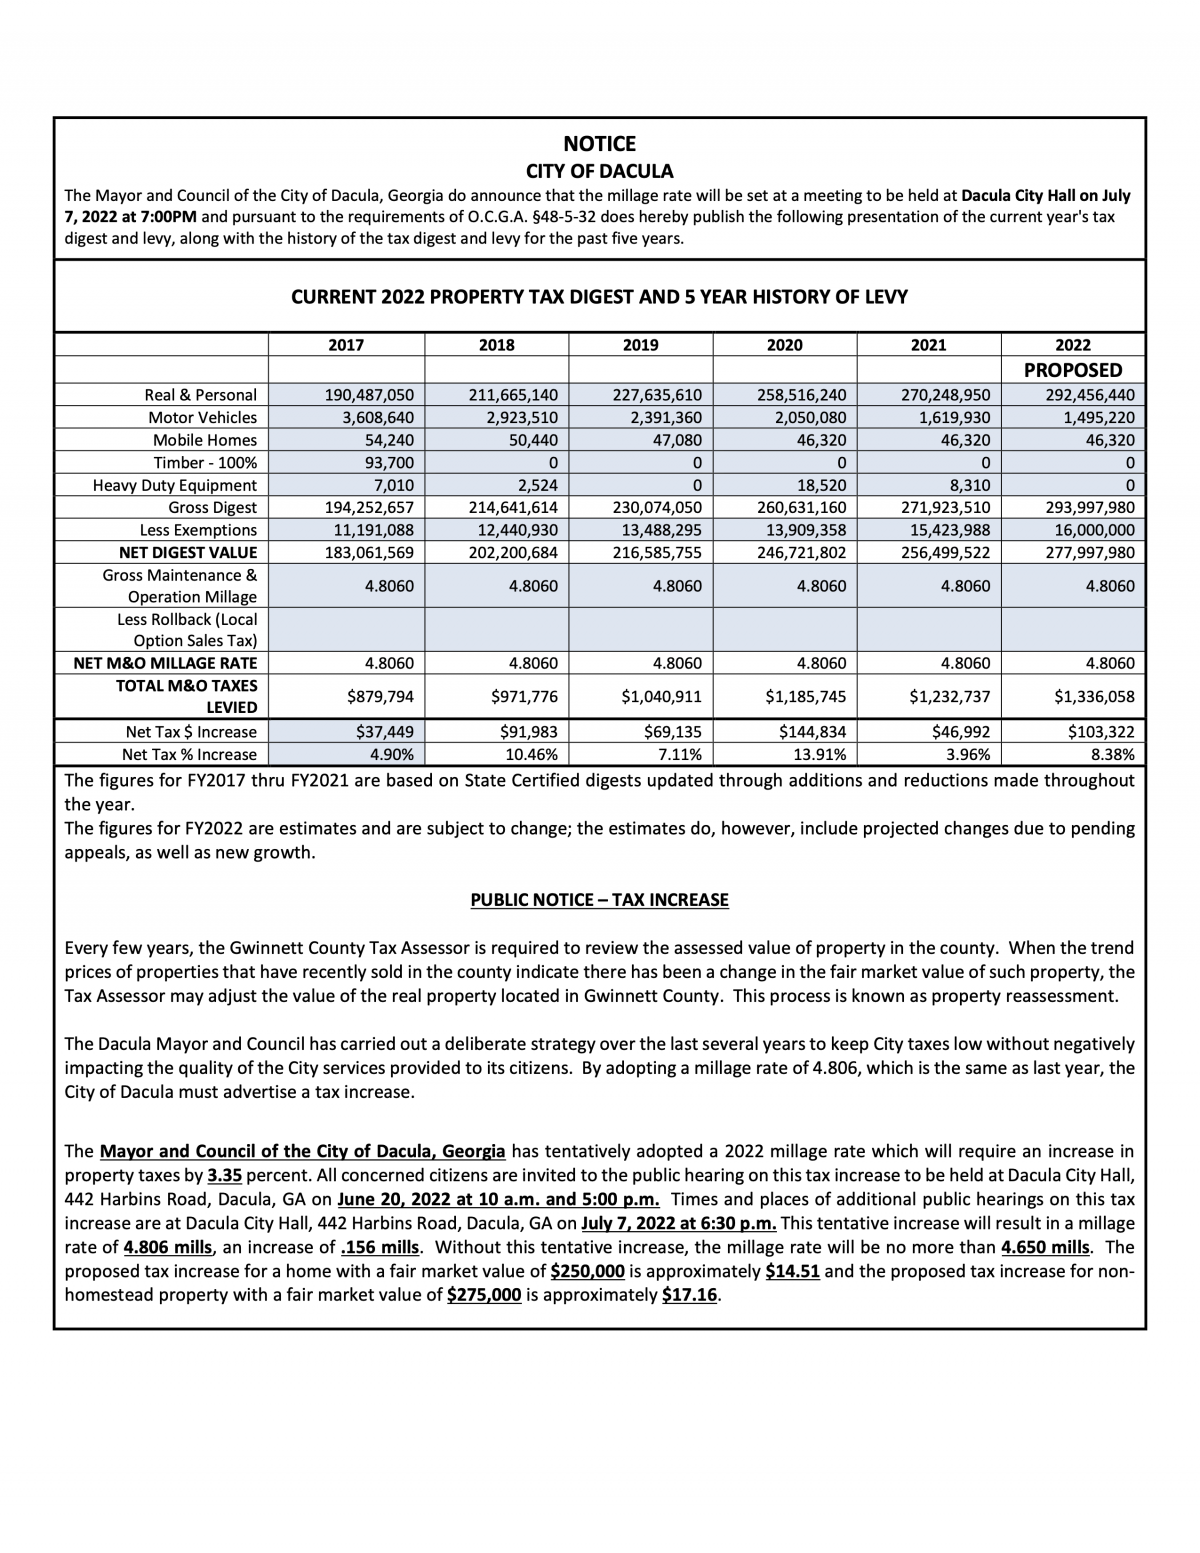 Millage Rate Public Hearing Notice 2022